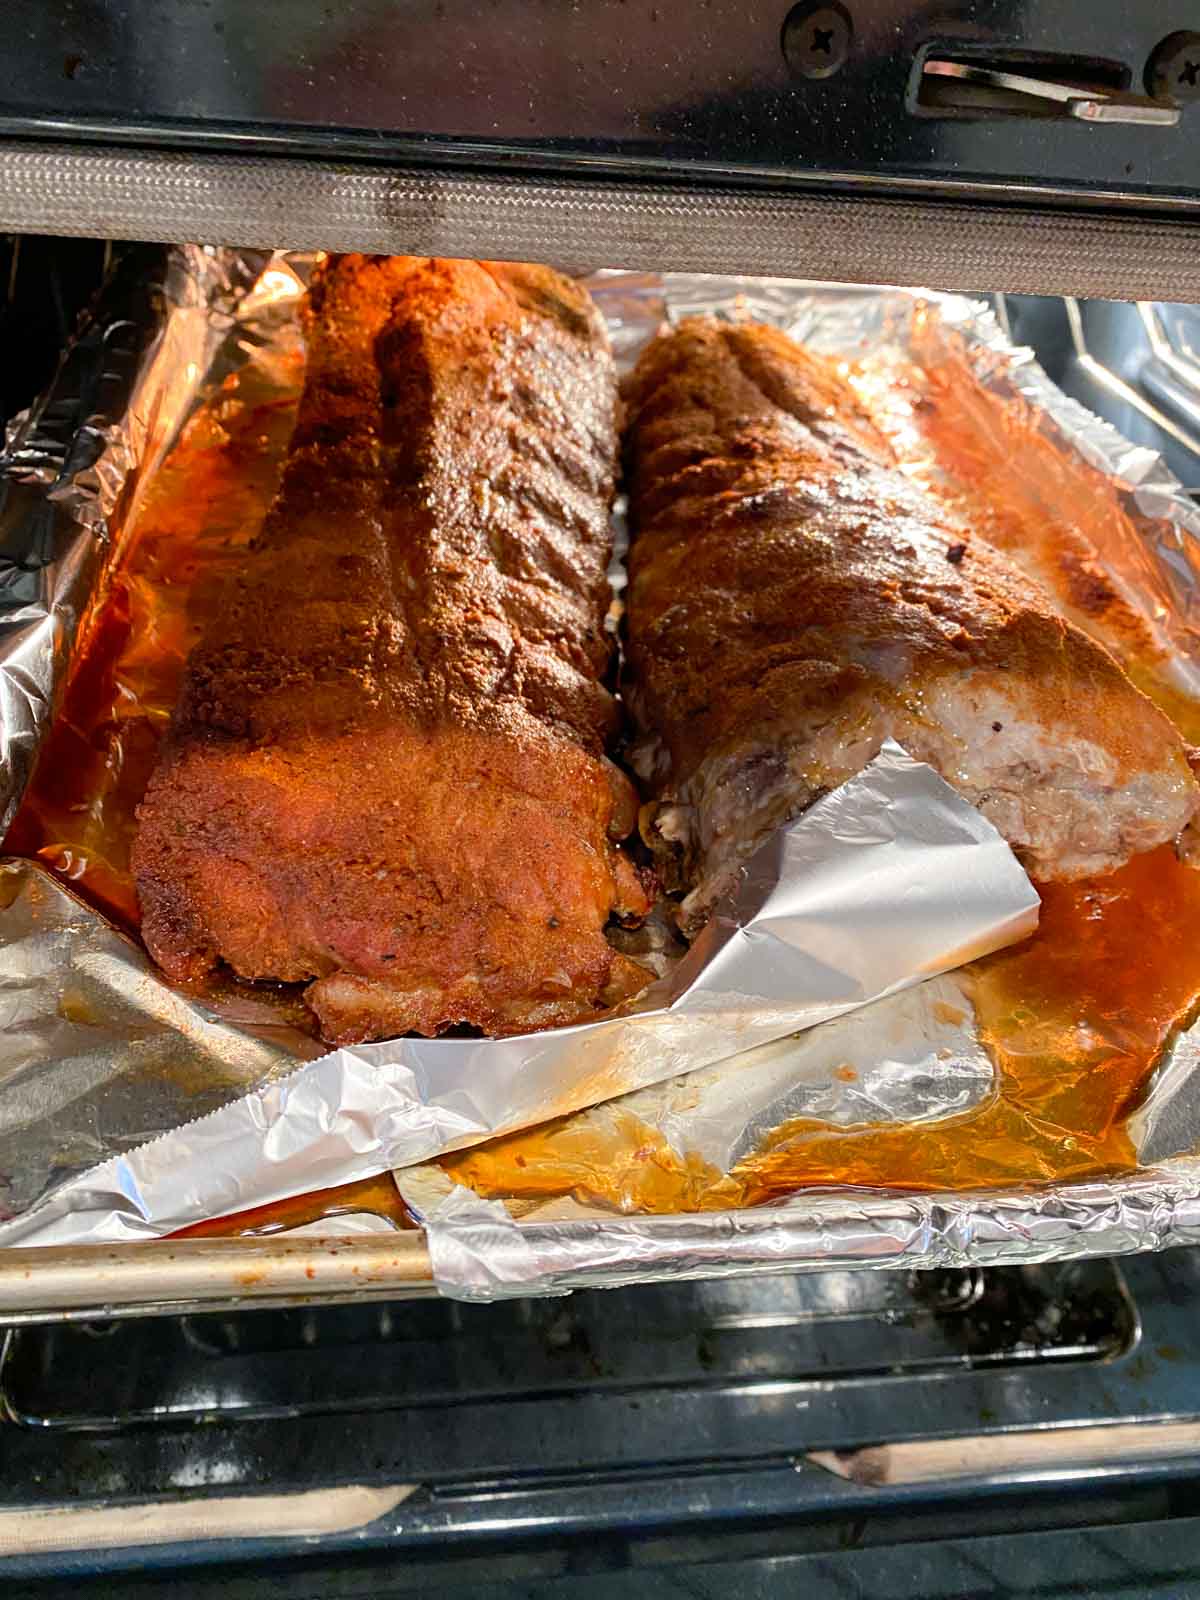 Two racks of ribs being broiled in the oven